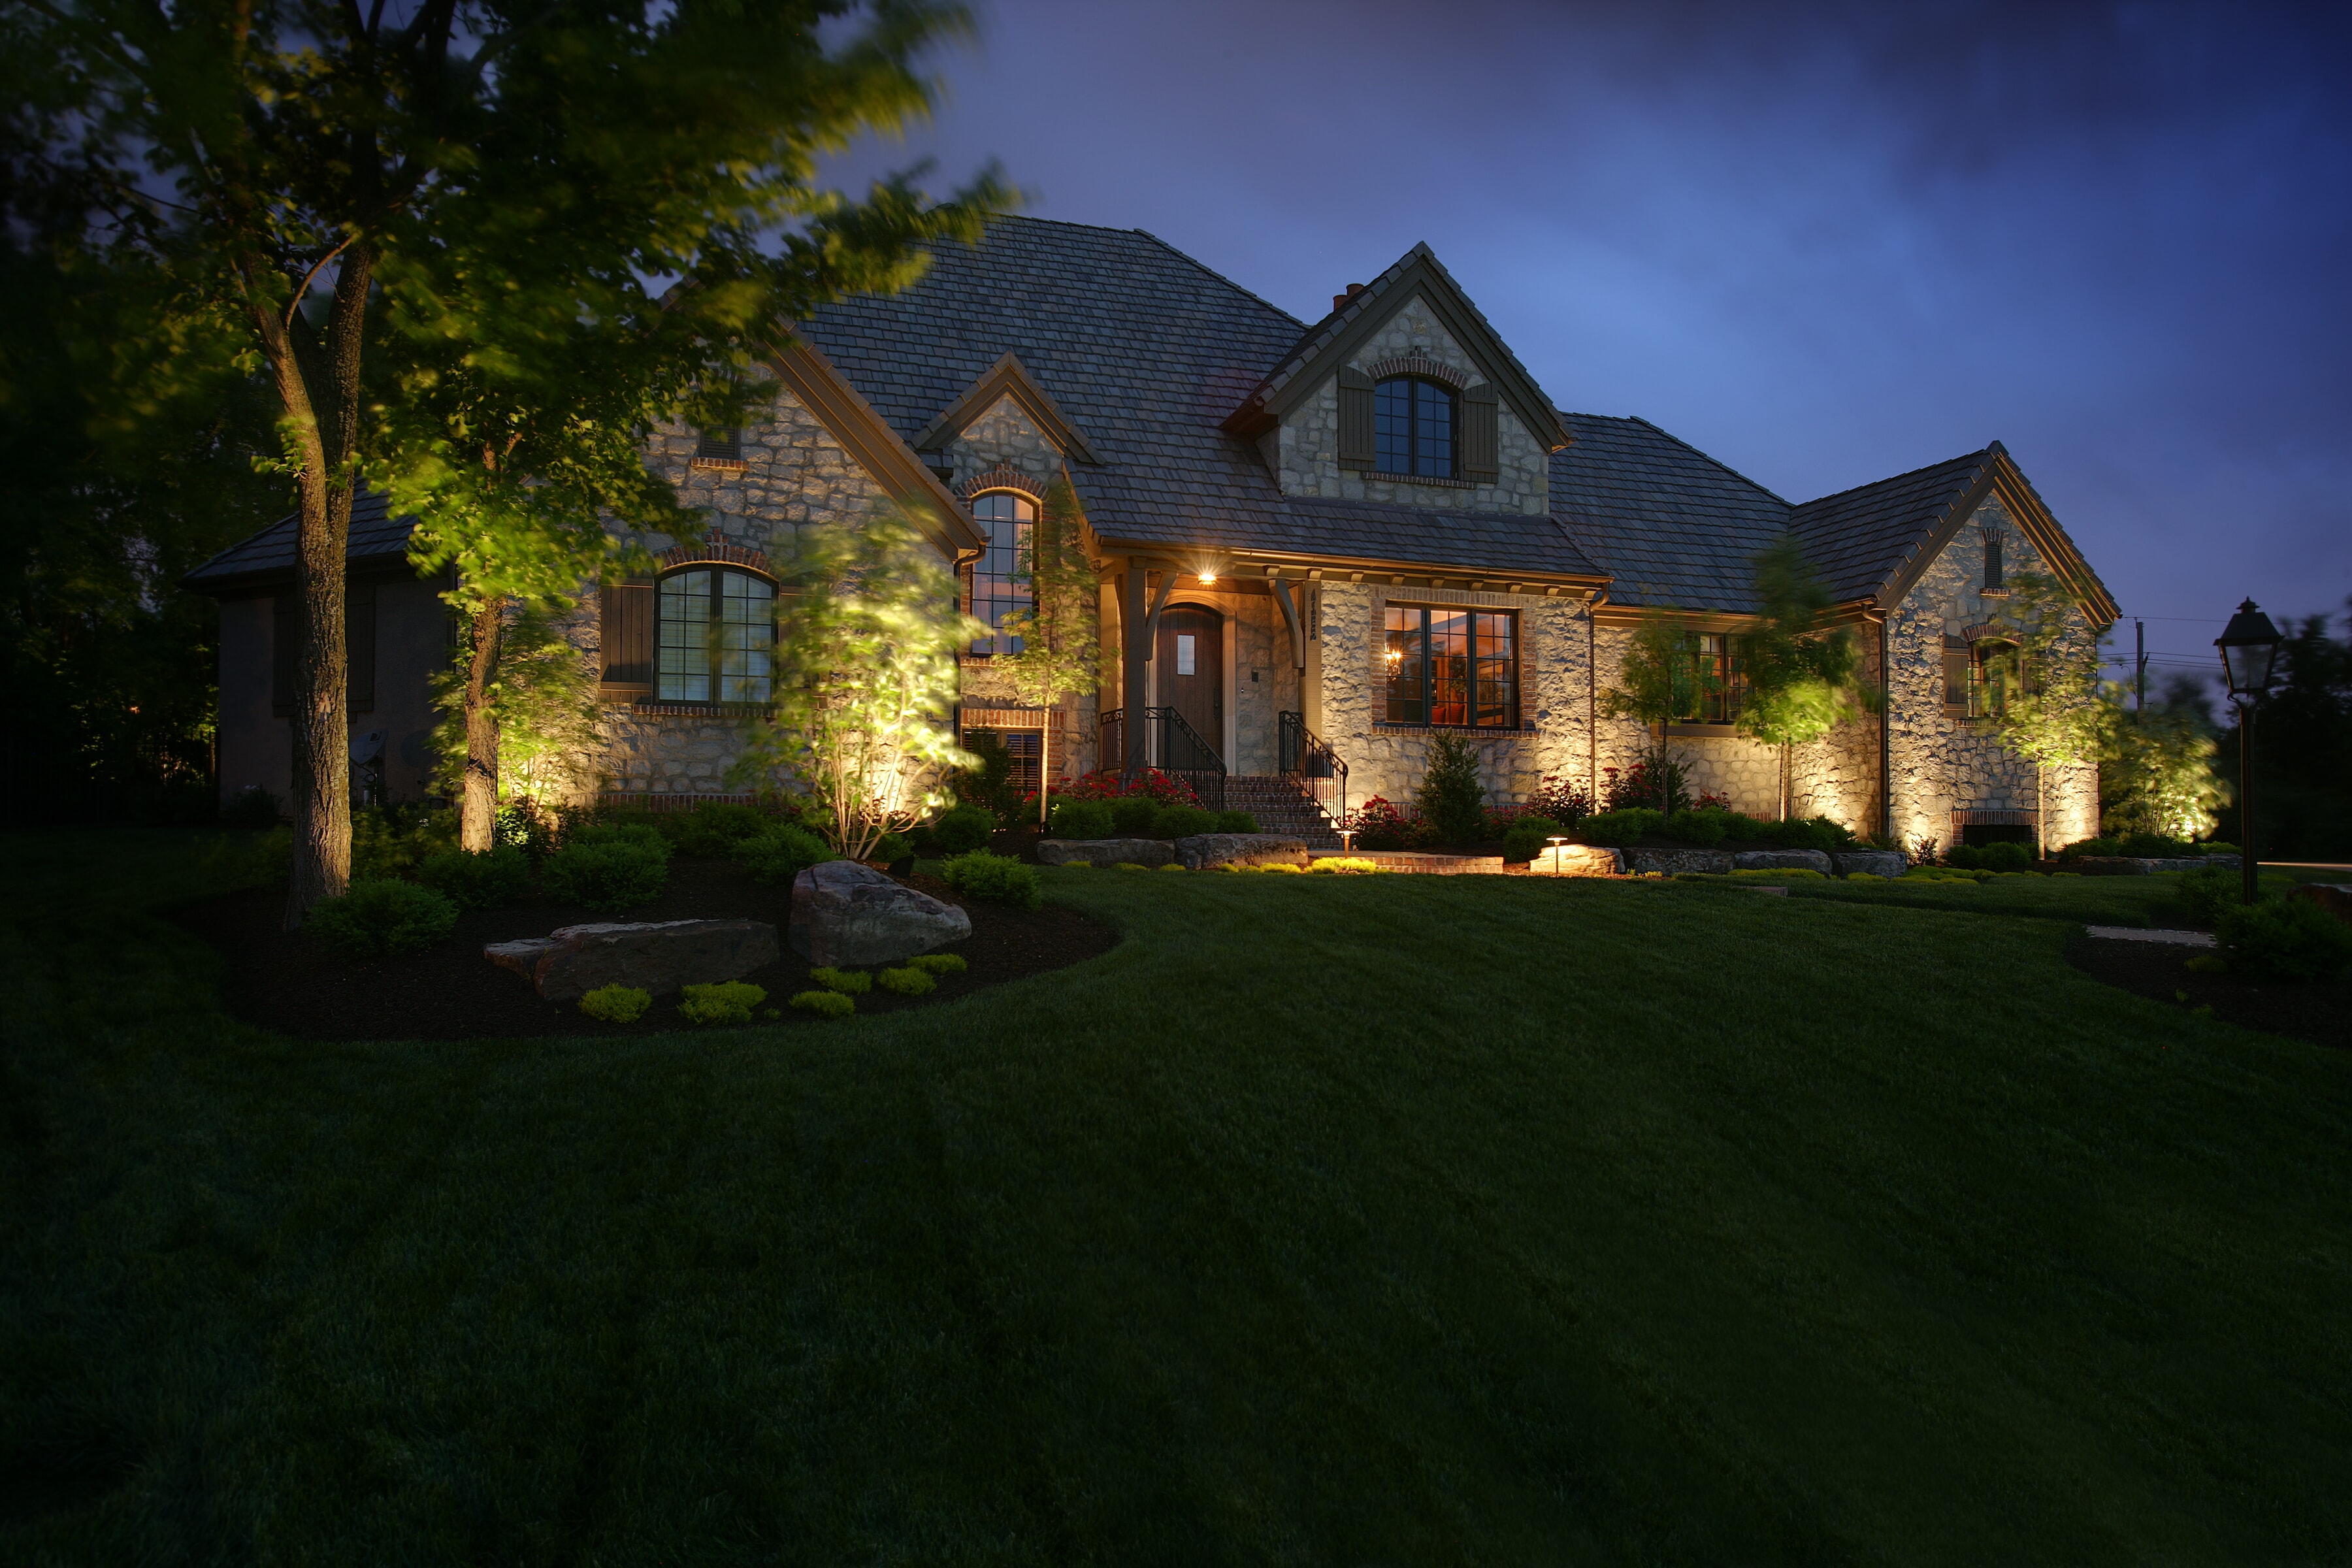 House with Green Lawn and Up Lighting Accents